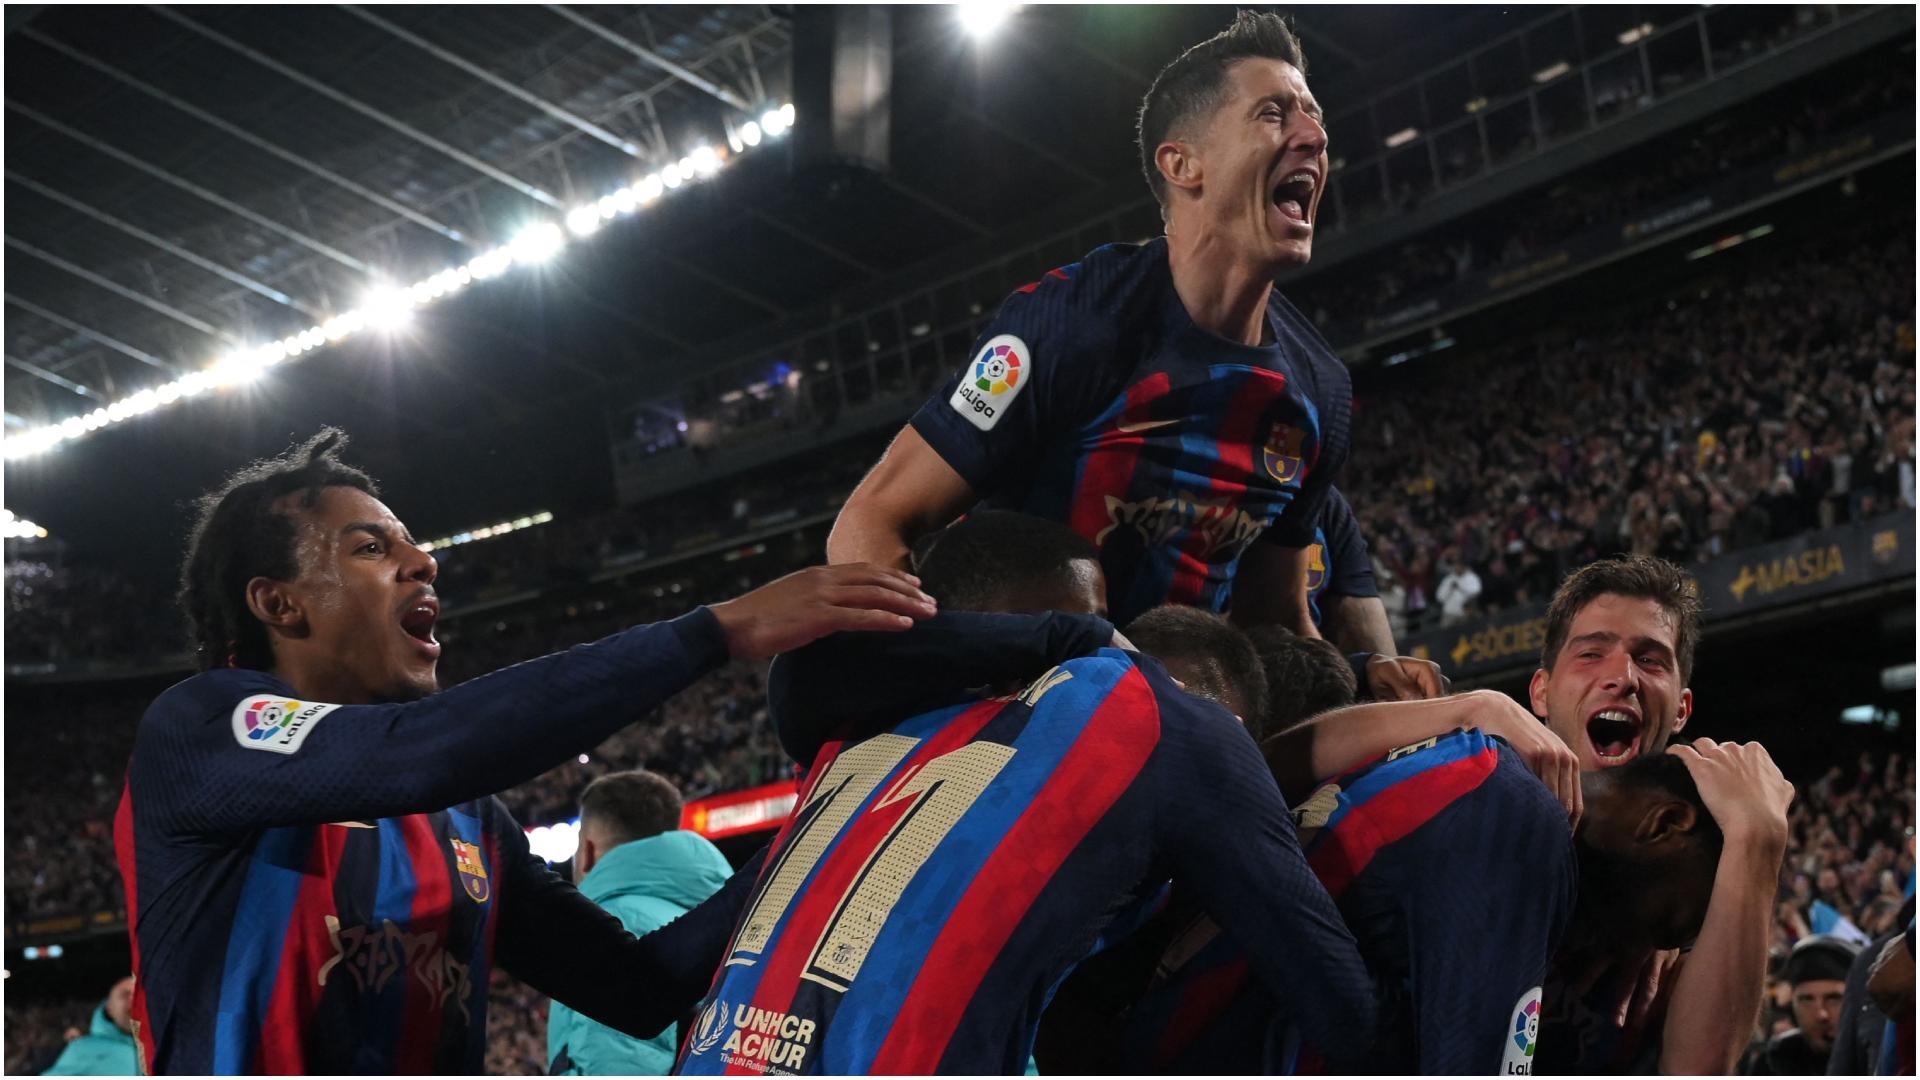 Barcelona claim all 3 points in the 90th minute in ElClásico